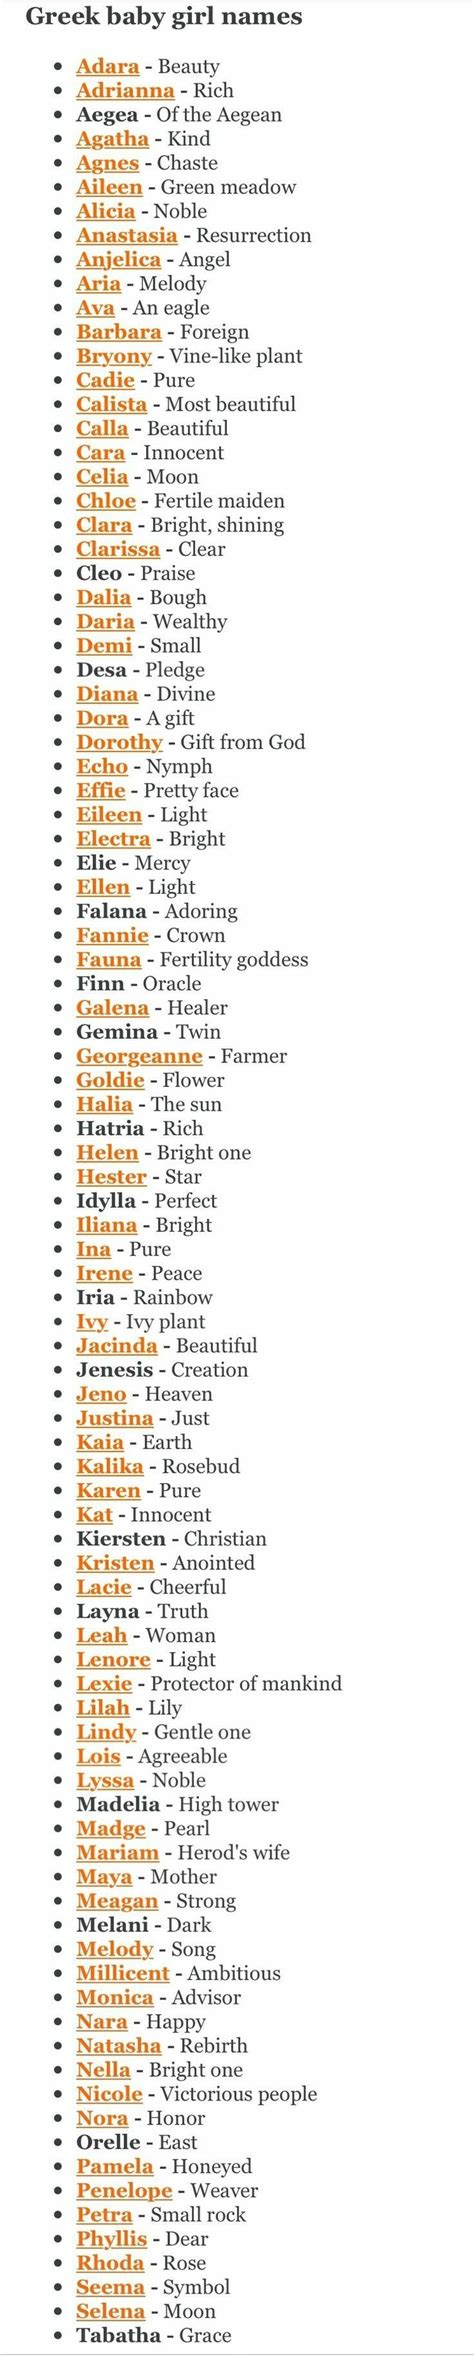 Greek Baby Girl Names With A